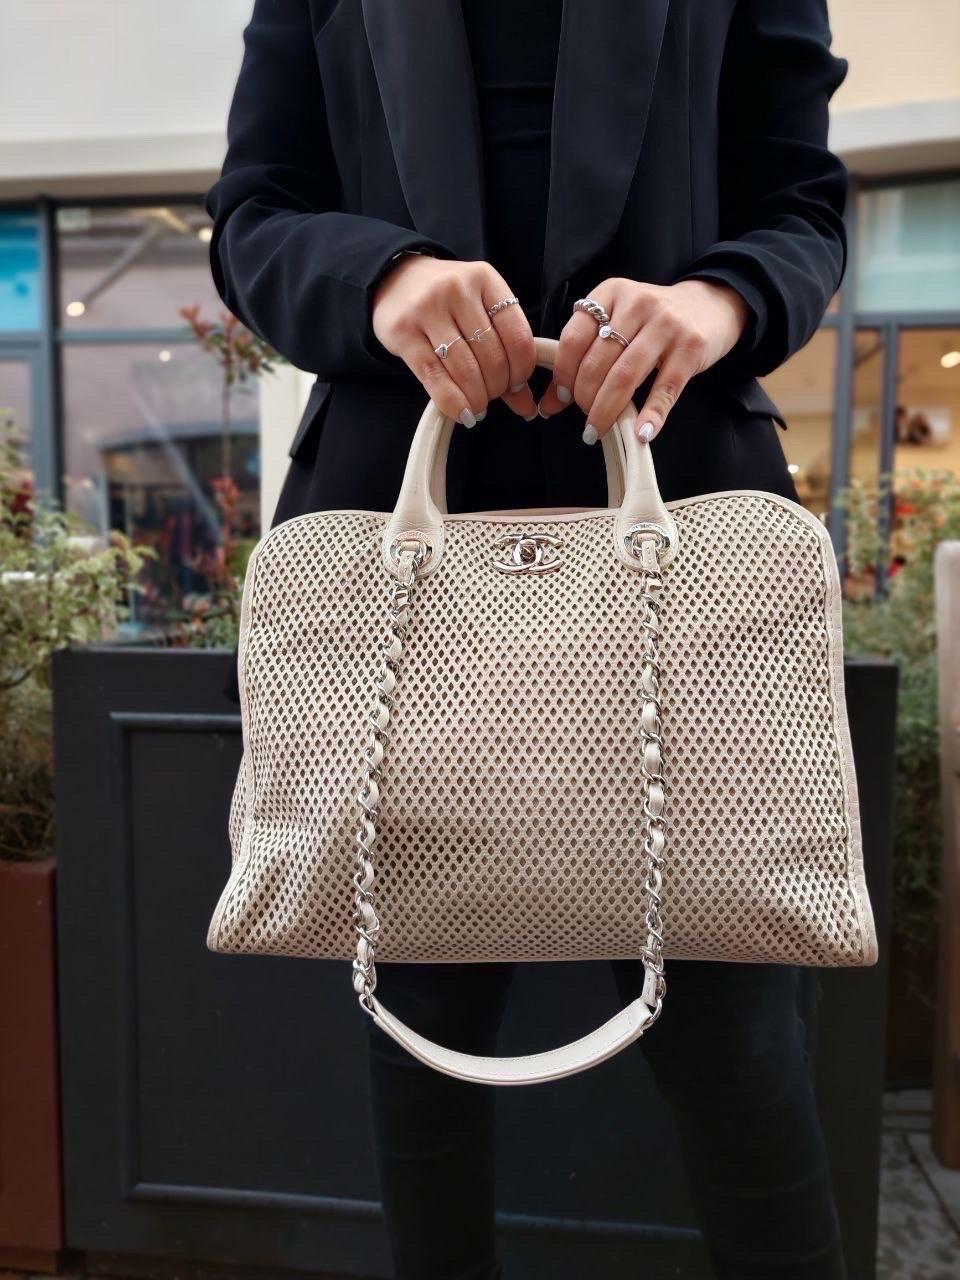 Chanel White Perforated Leather Shopper Deauville Bag 5